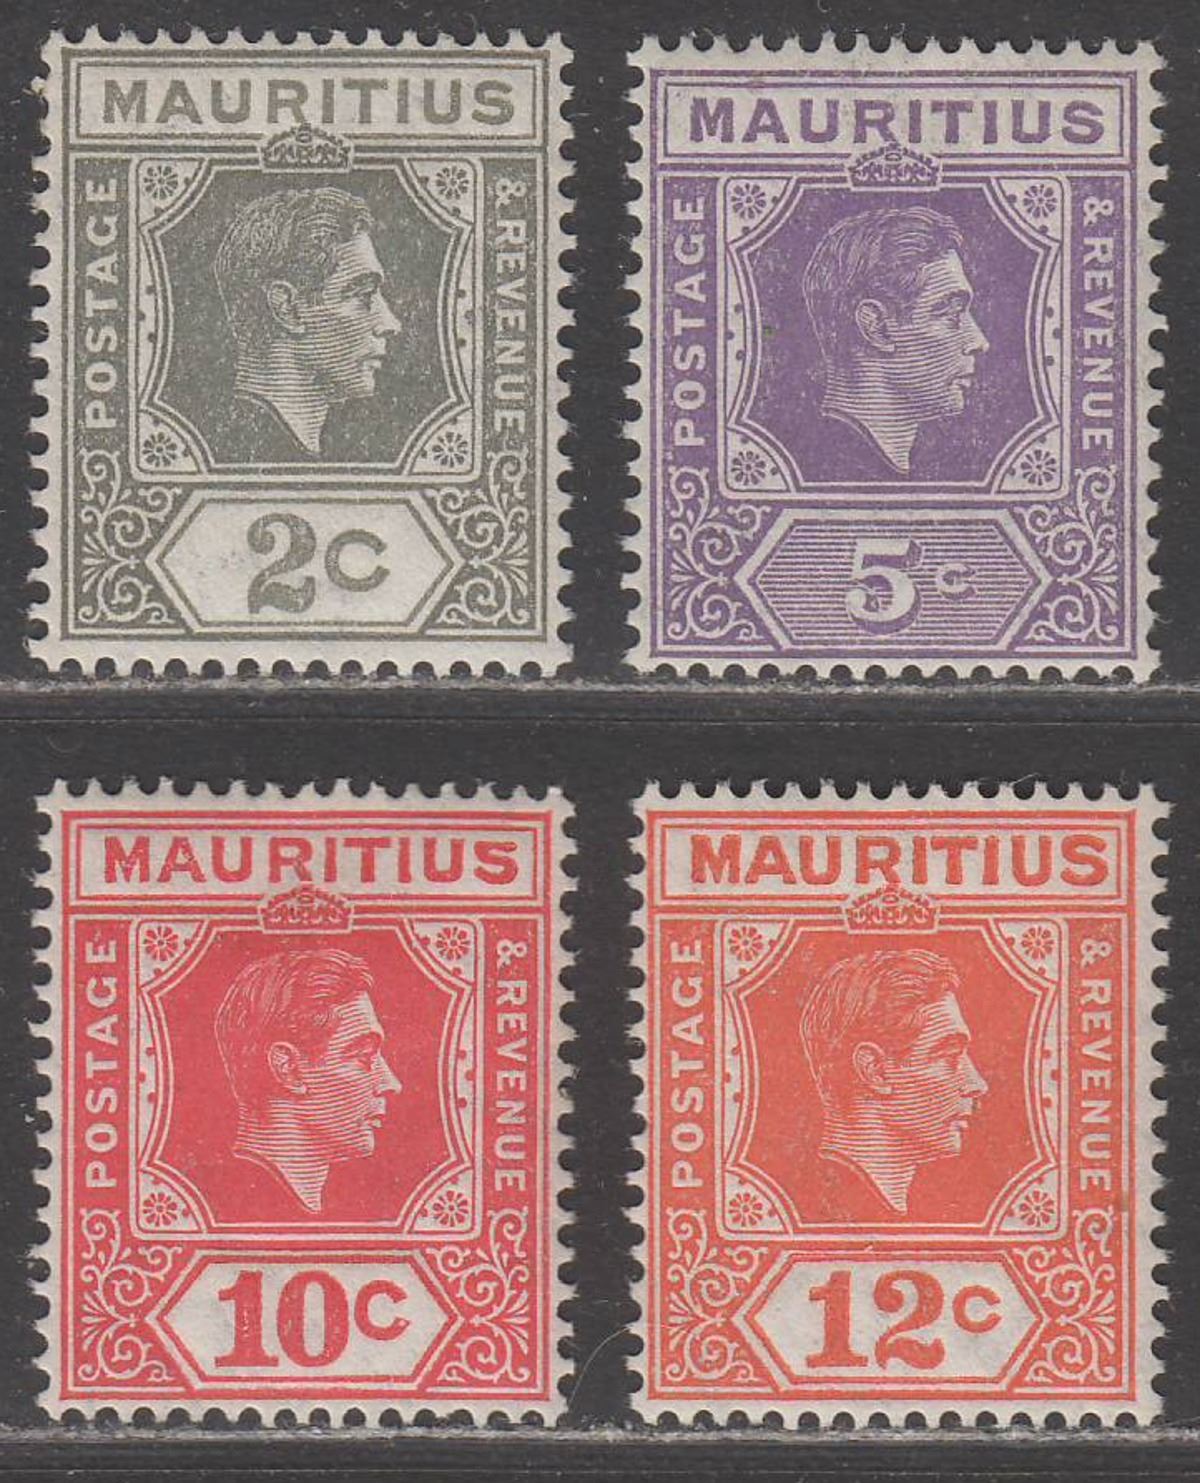 Mauritius 1942 King George VI Selection to 12c perf 15x14 Mint cat £158